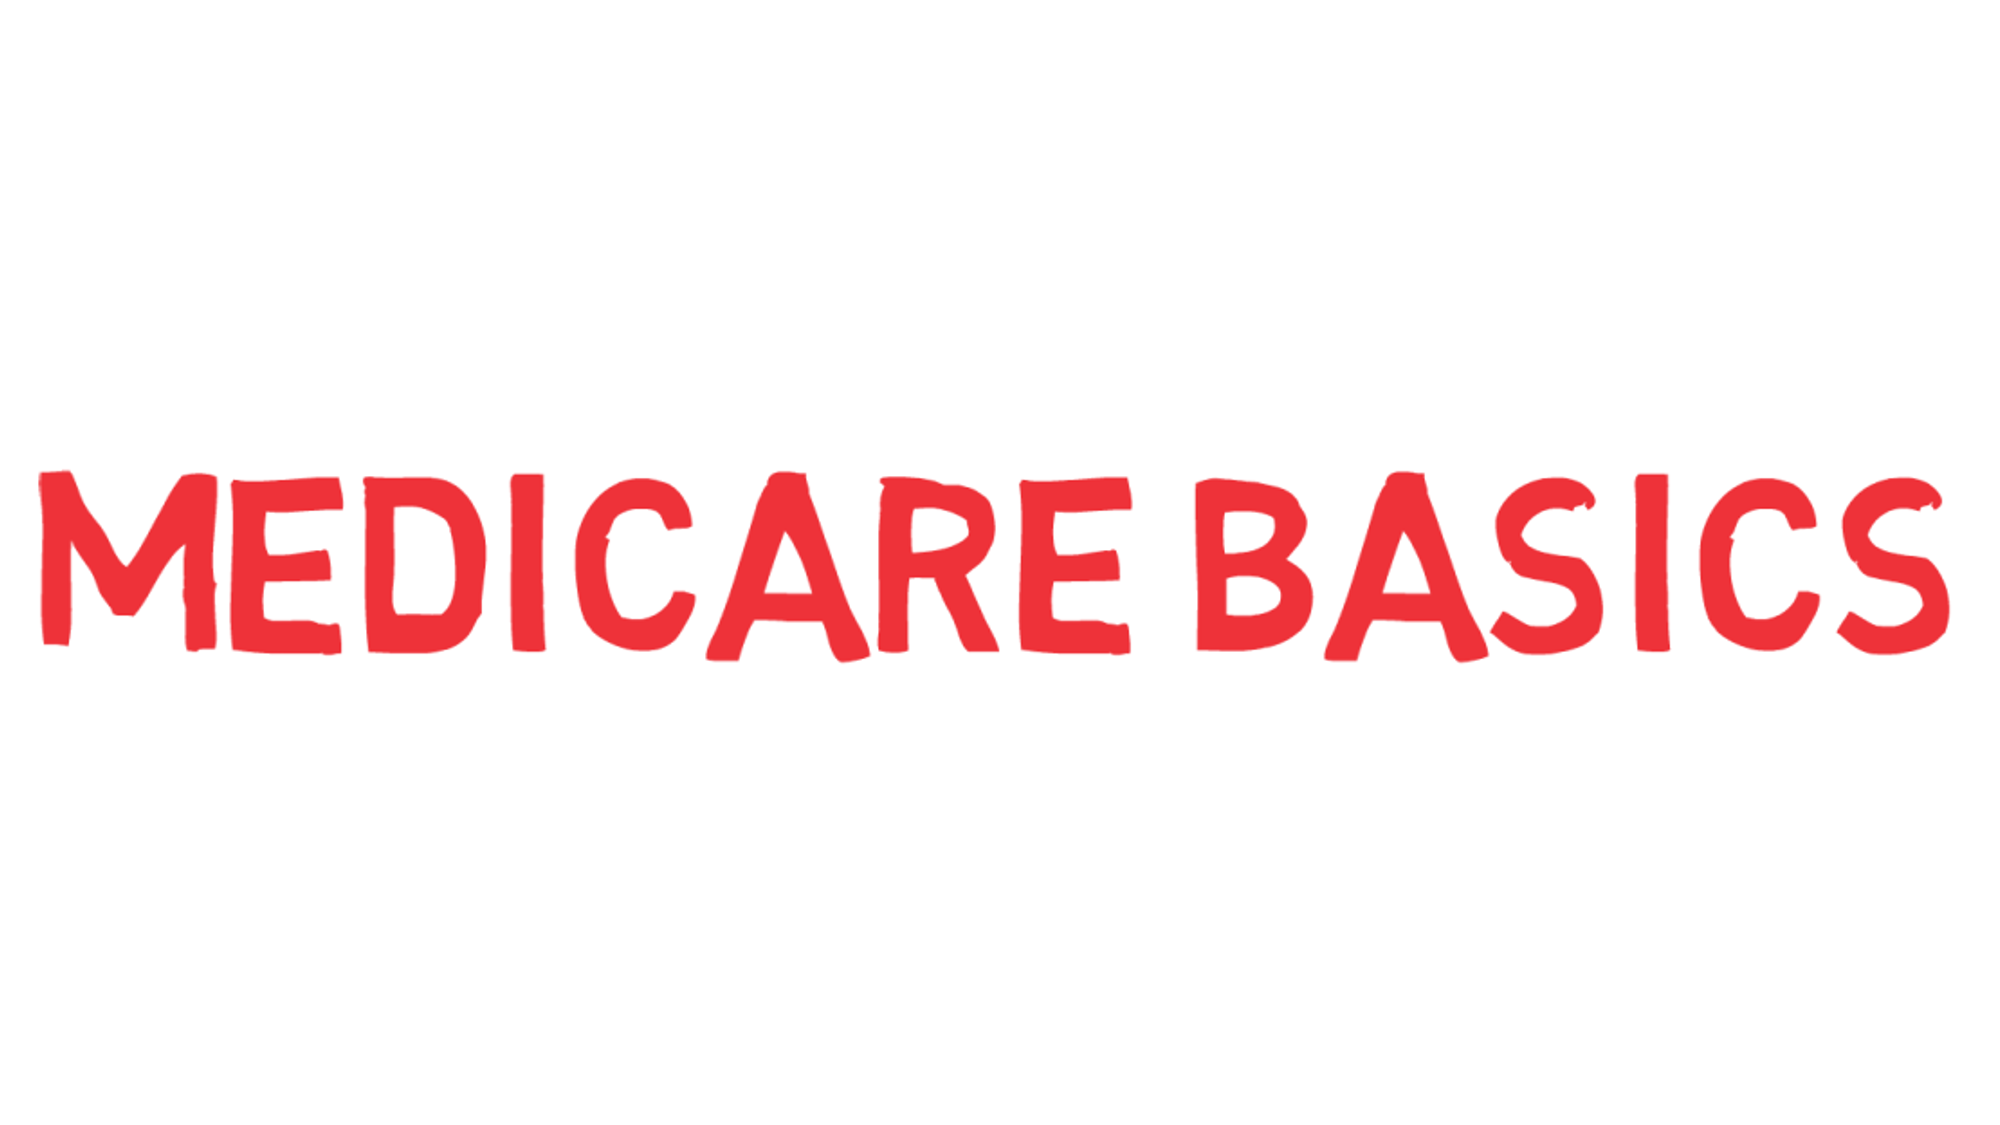 Medicare Made Clear